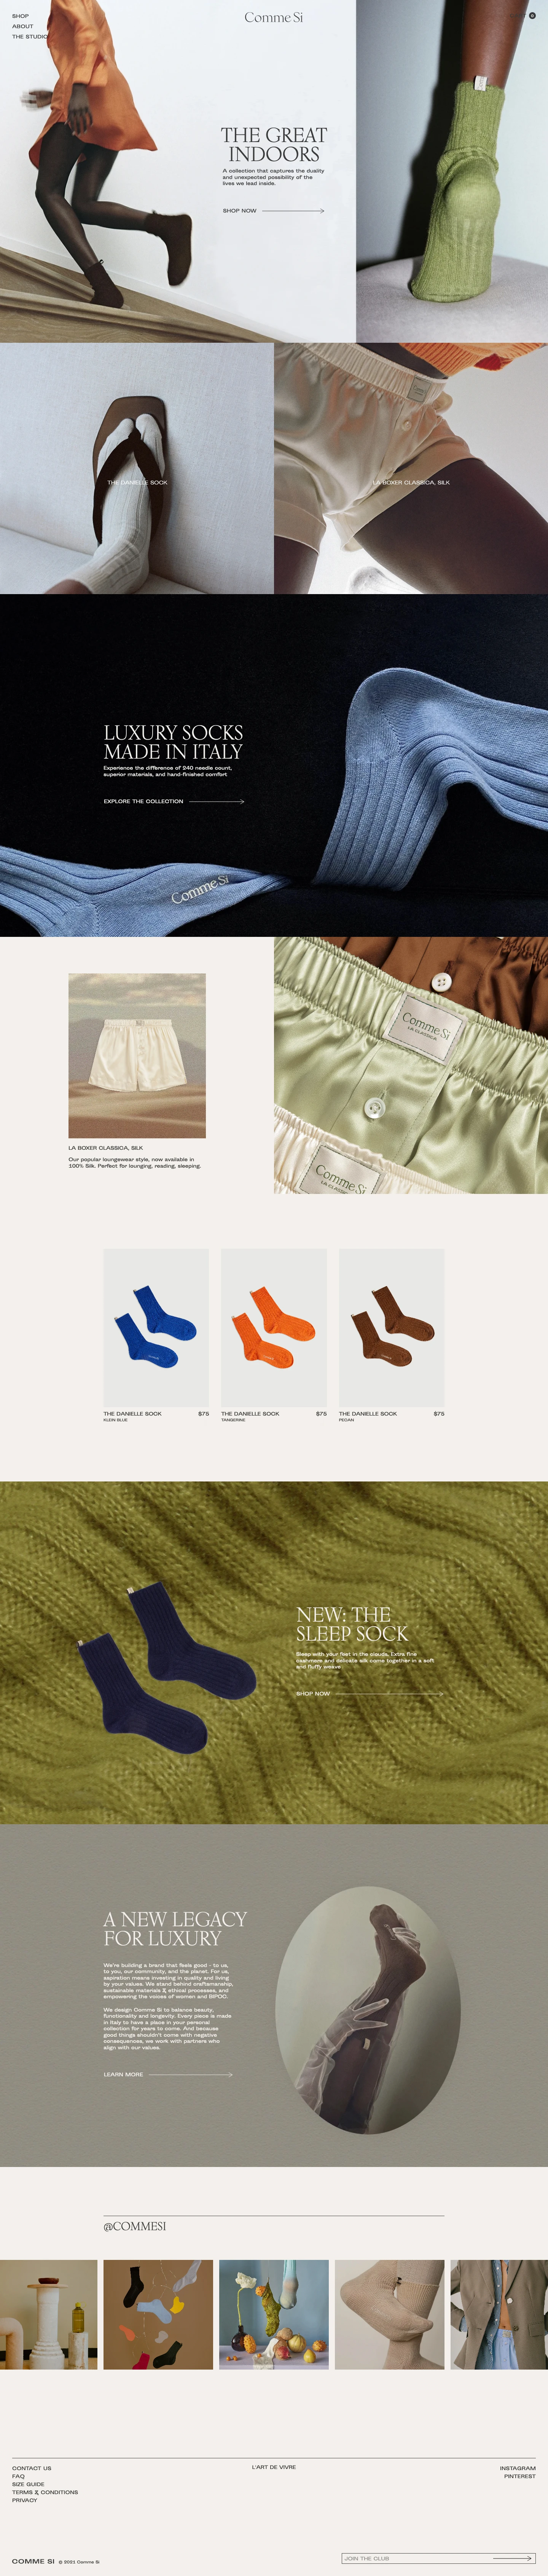 Comme Si Landing Page Example: Refined socks that are both functional and beautiful. Made in Italy from the highest quality natural materials like cashmere, silk, merino wool, cotton. Enjoy a little luxury and upgrade your sock drawer.